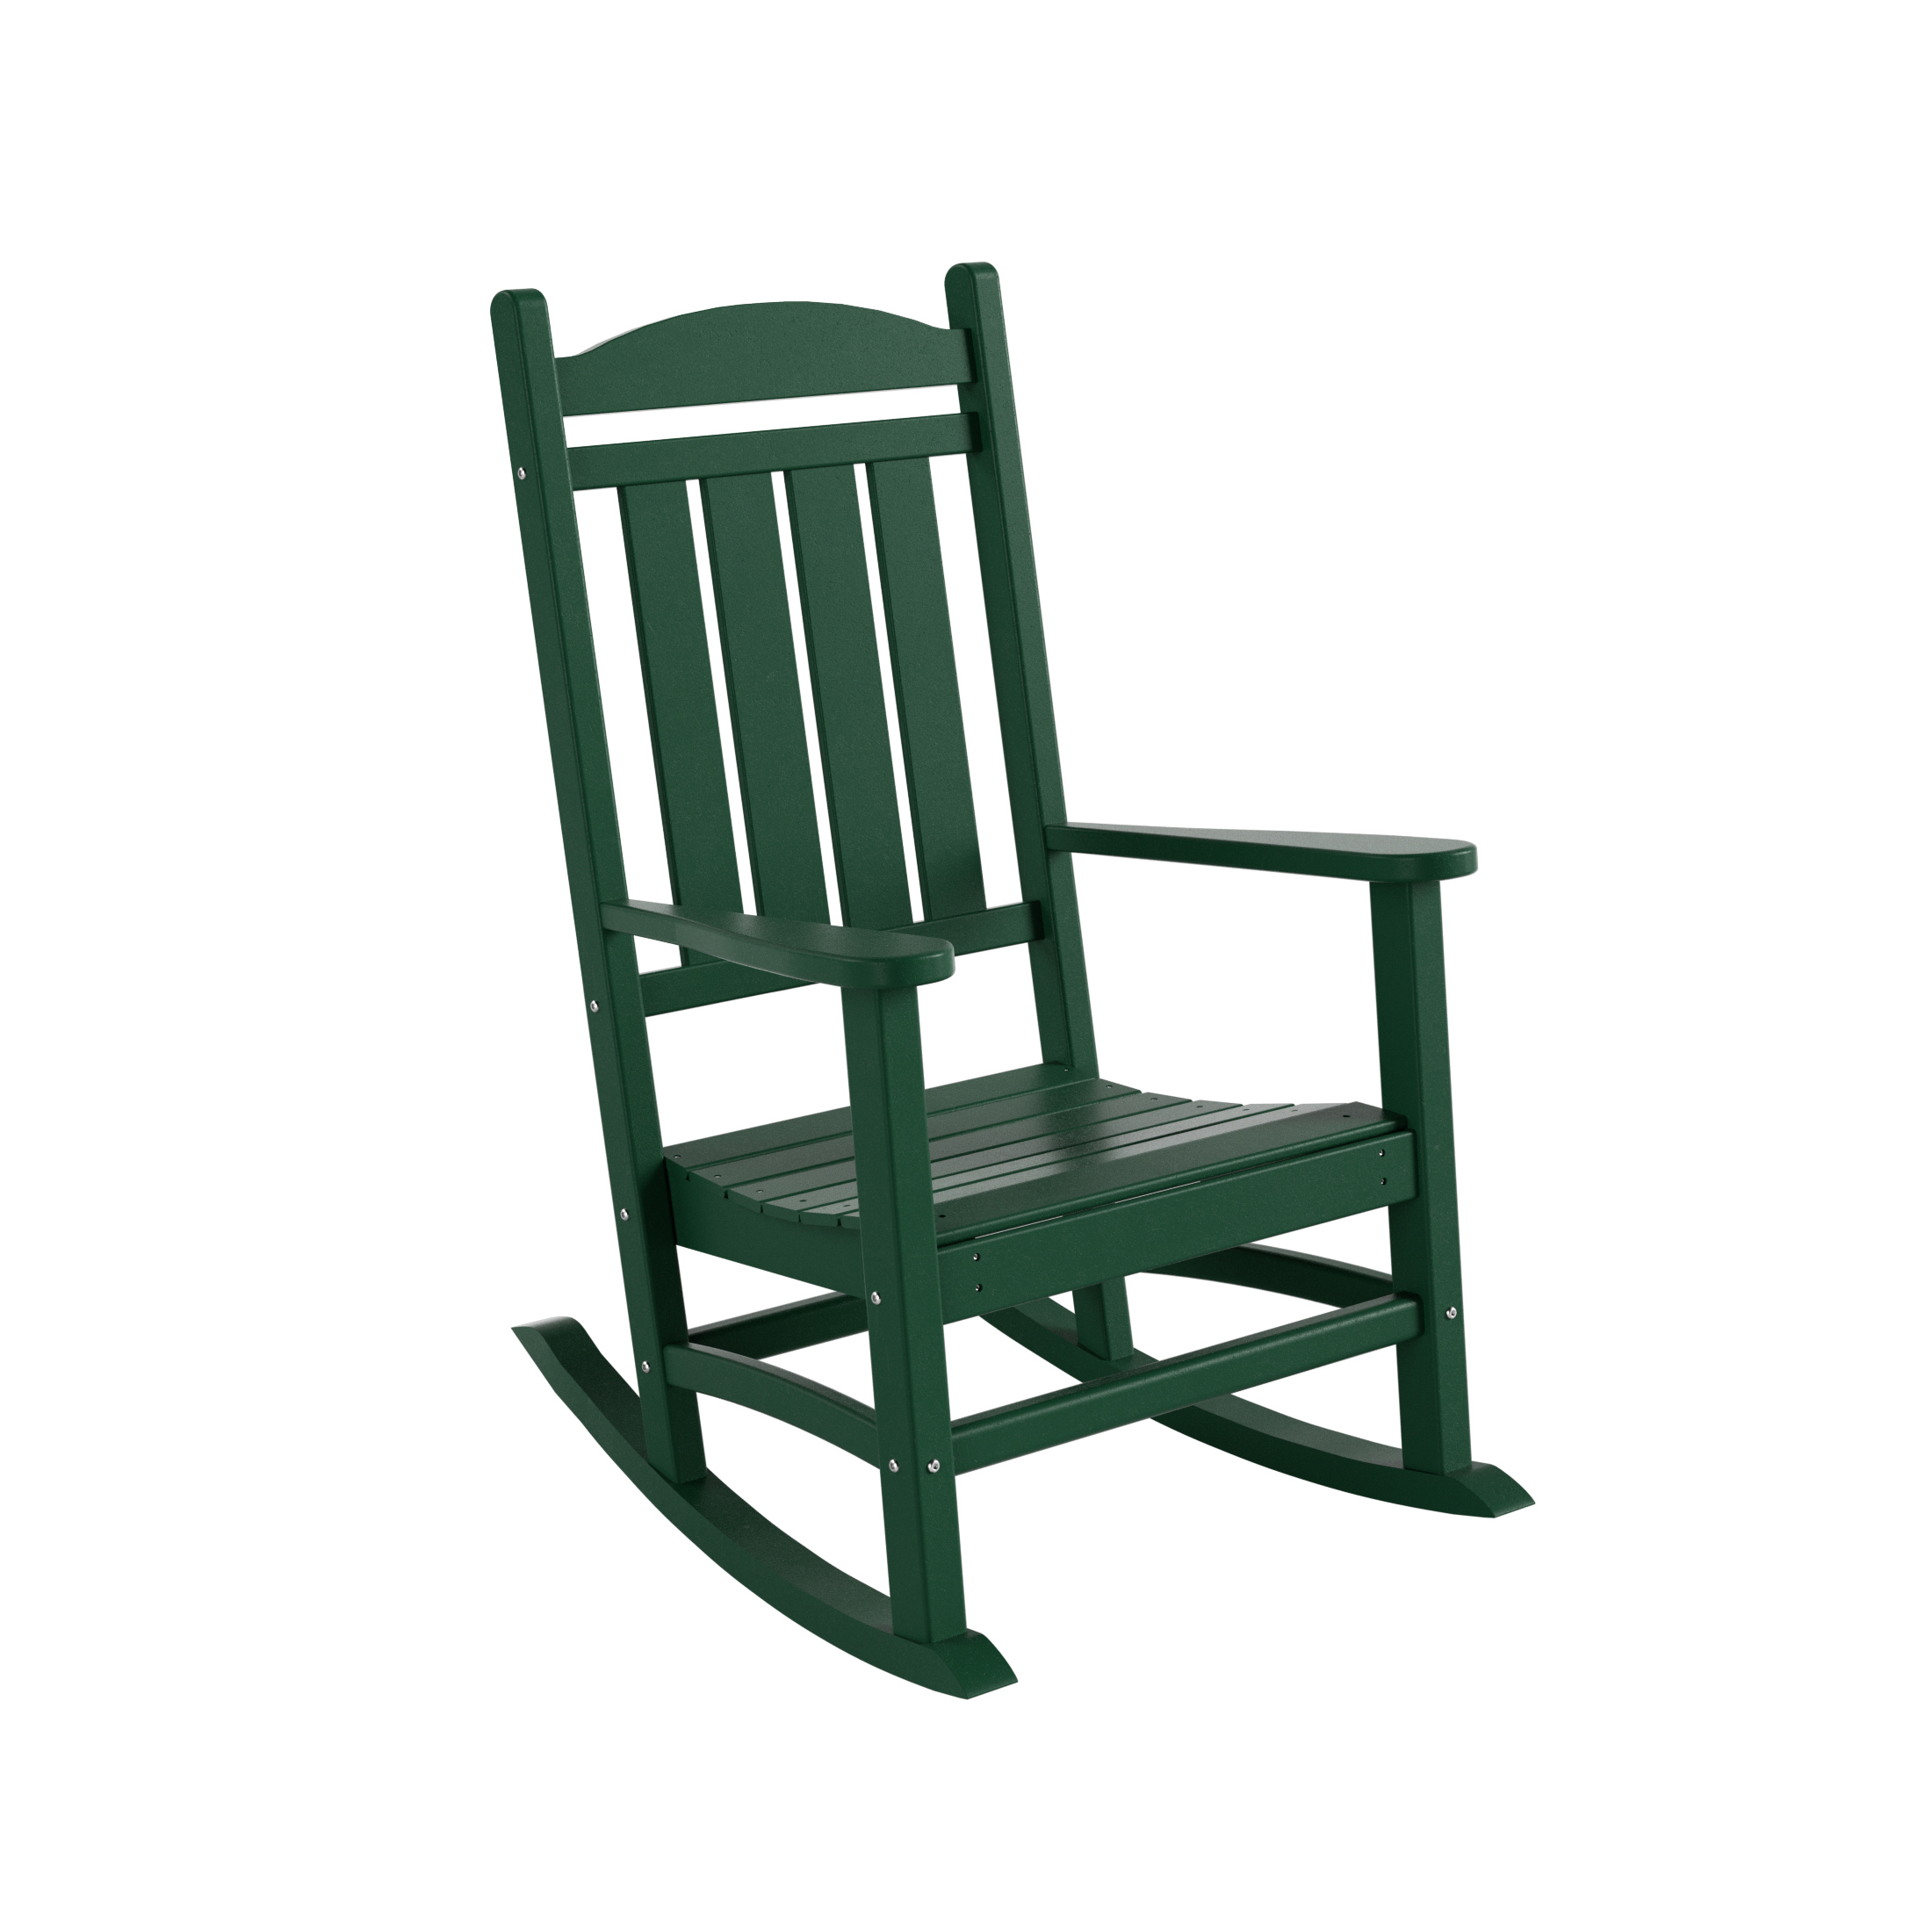 Costaelm Paradise Classic Plastic Outdoor Porch Rocking Chairs (Set of 4), Dark Green - image 2 of 8